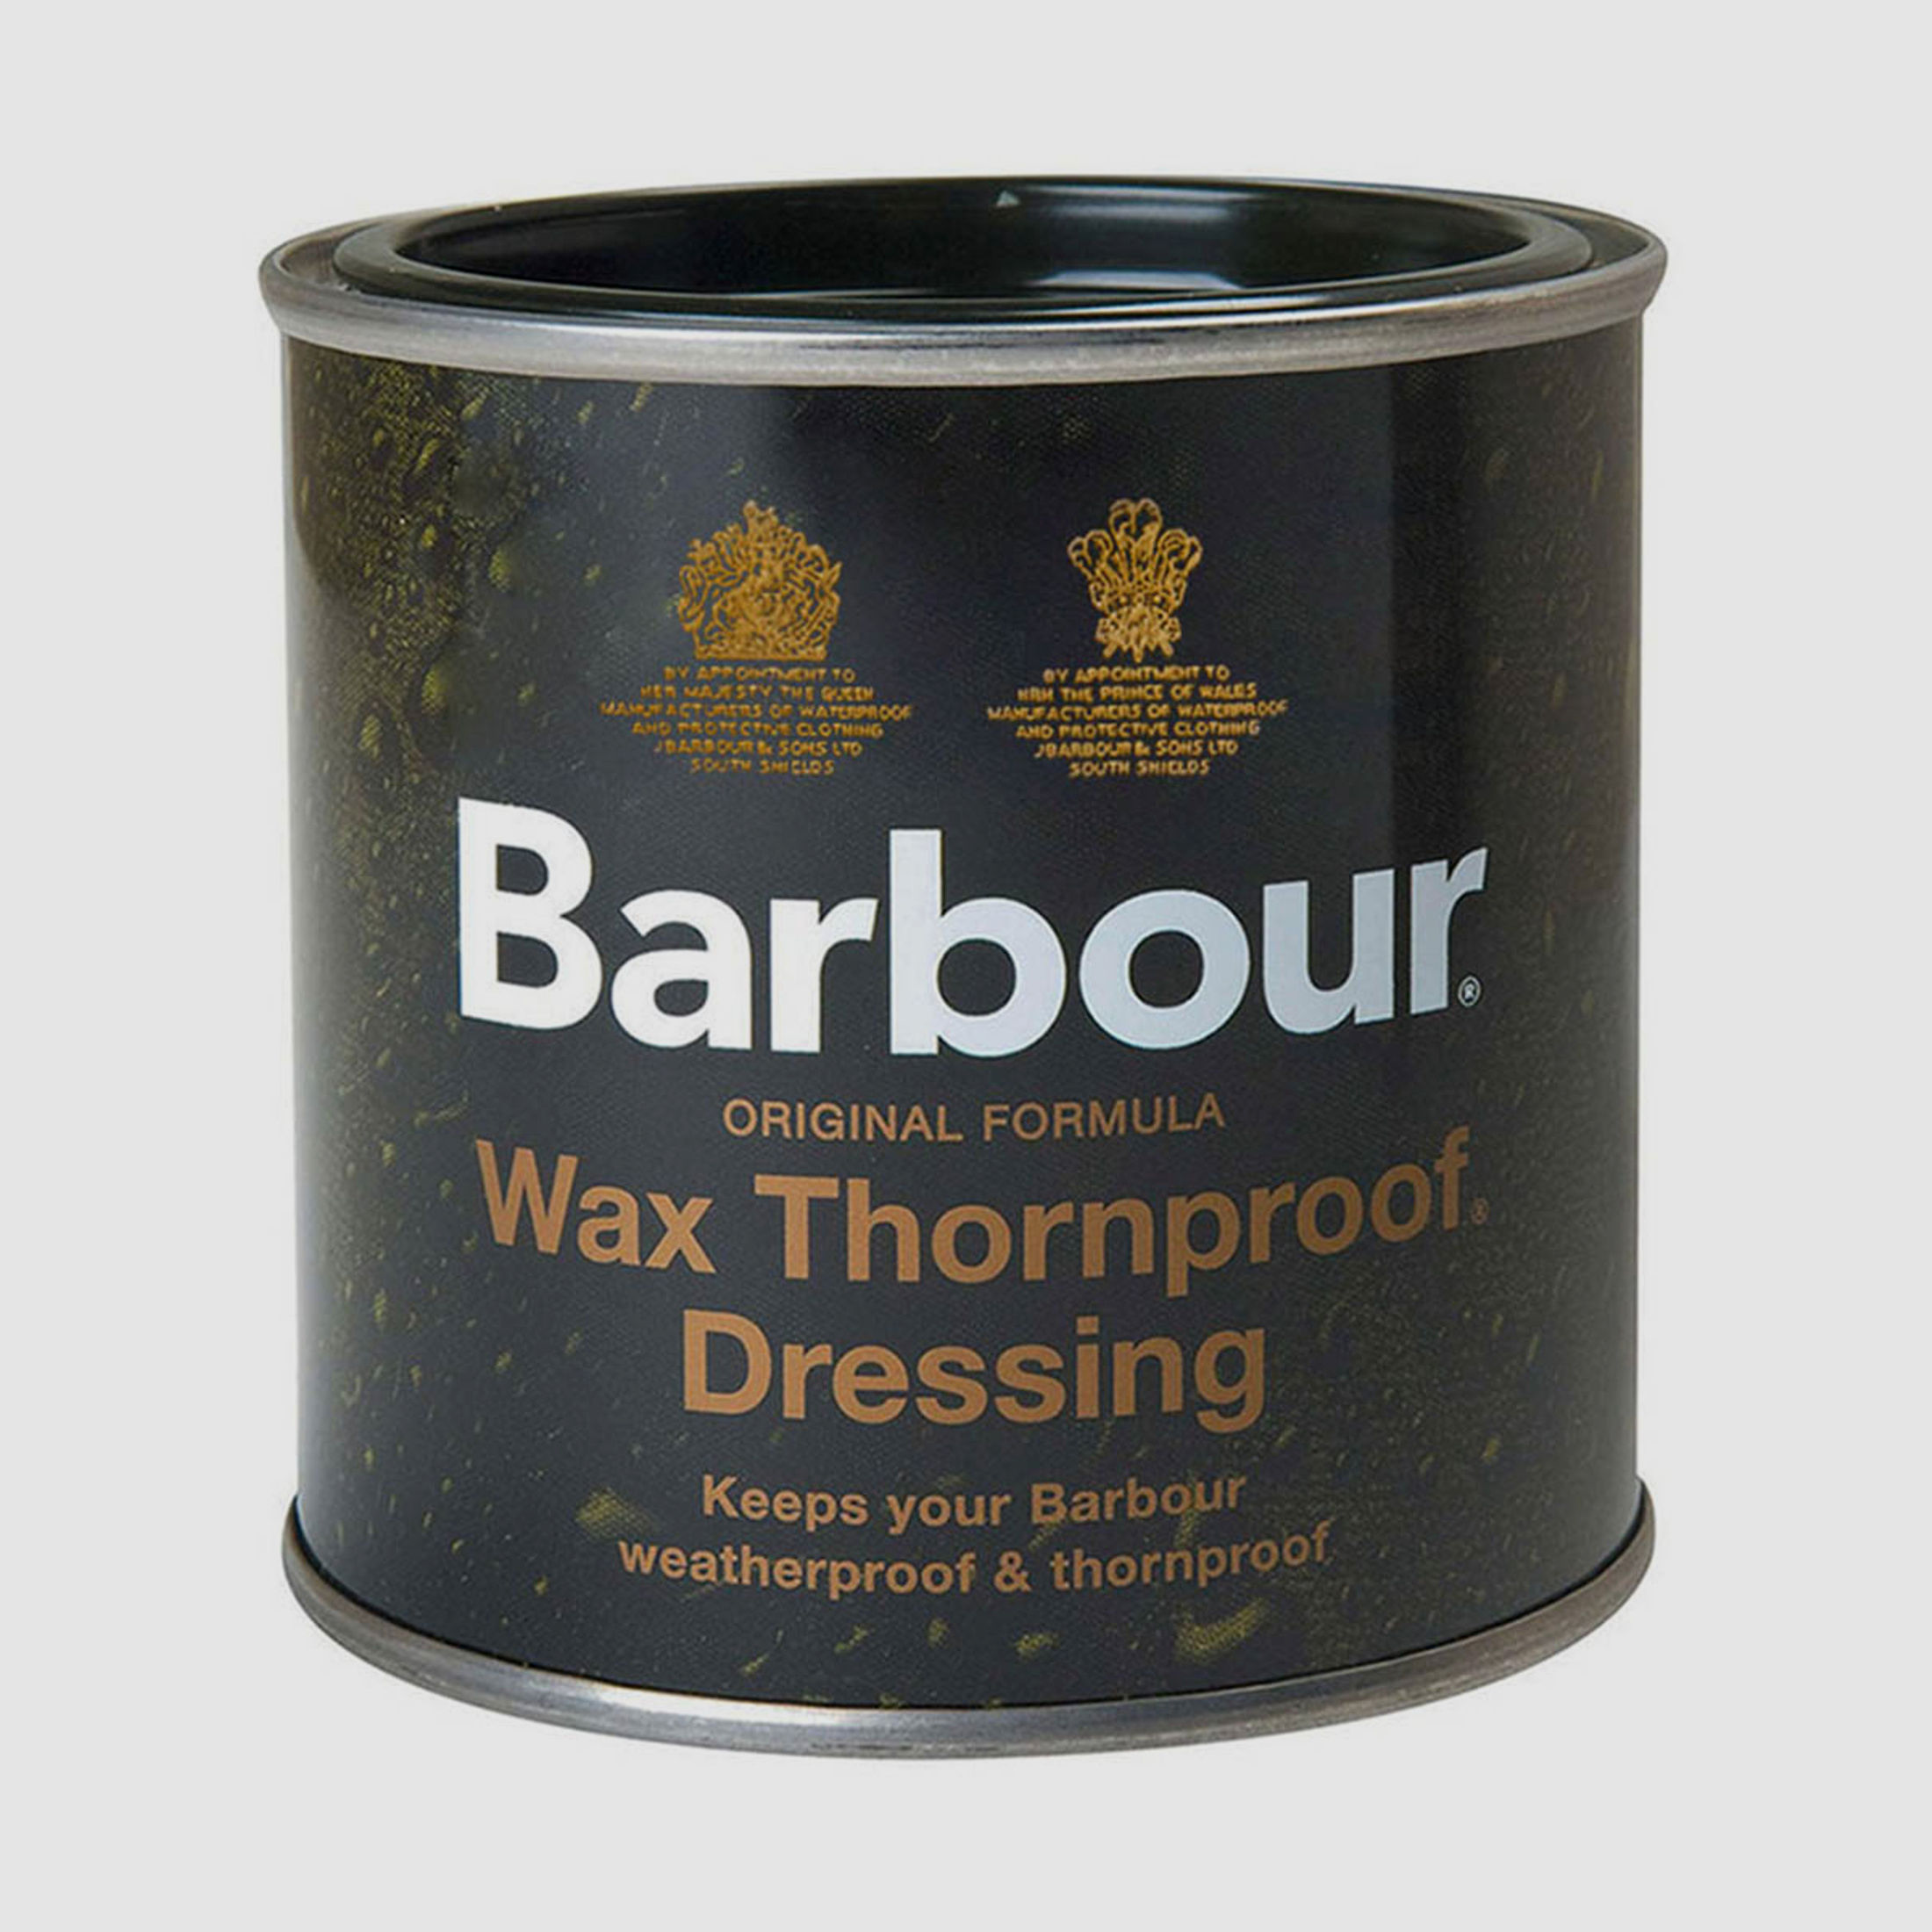 Barbour Wax Thornproof Dressing  N/A